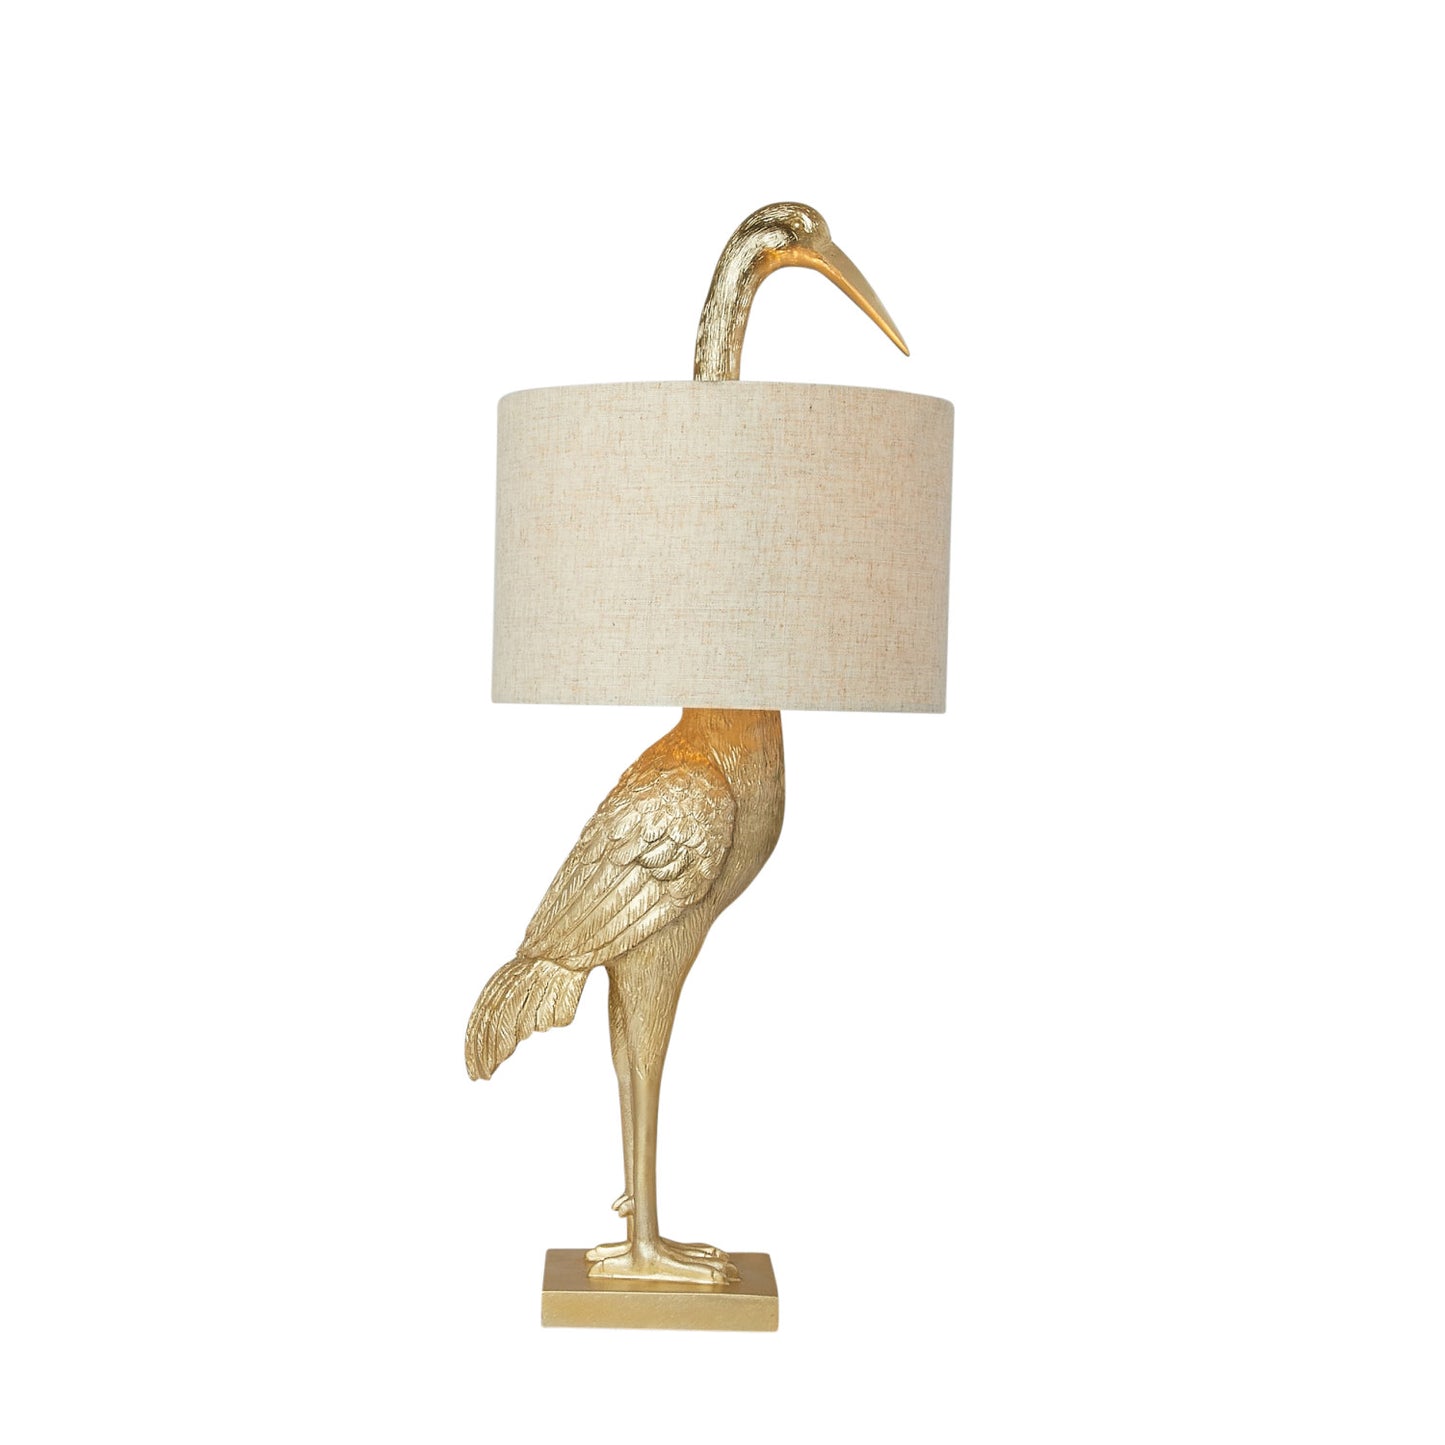 Lamp Tabletop Resin Bird with White Linen Shade Gold Finish